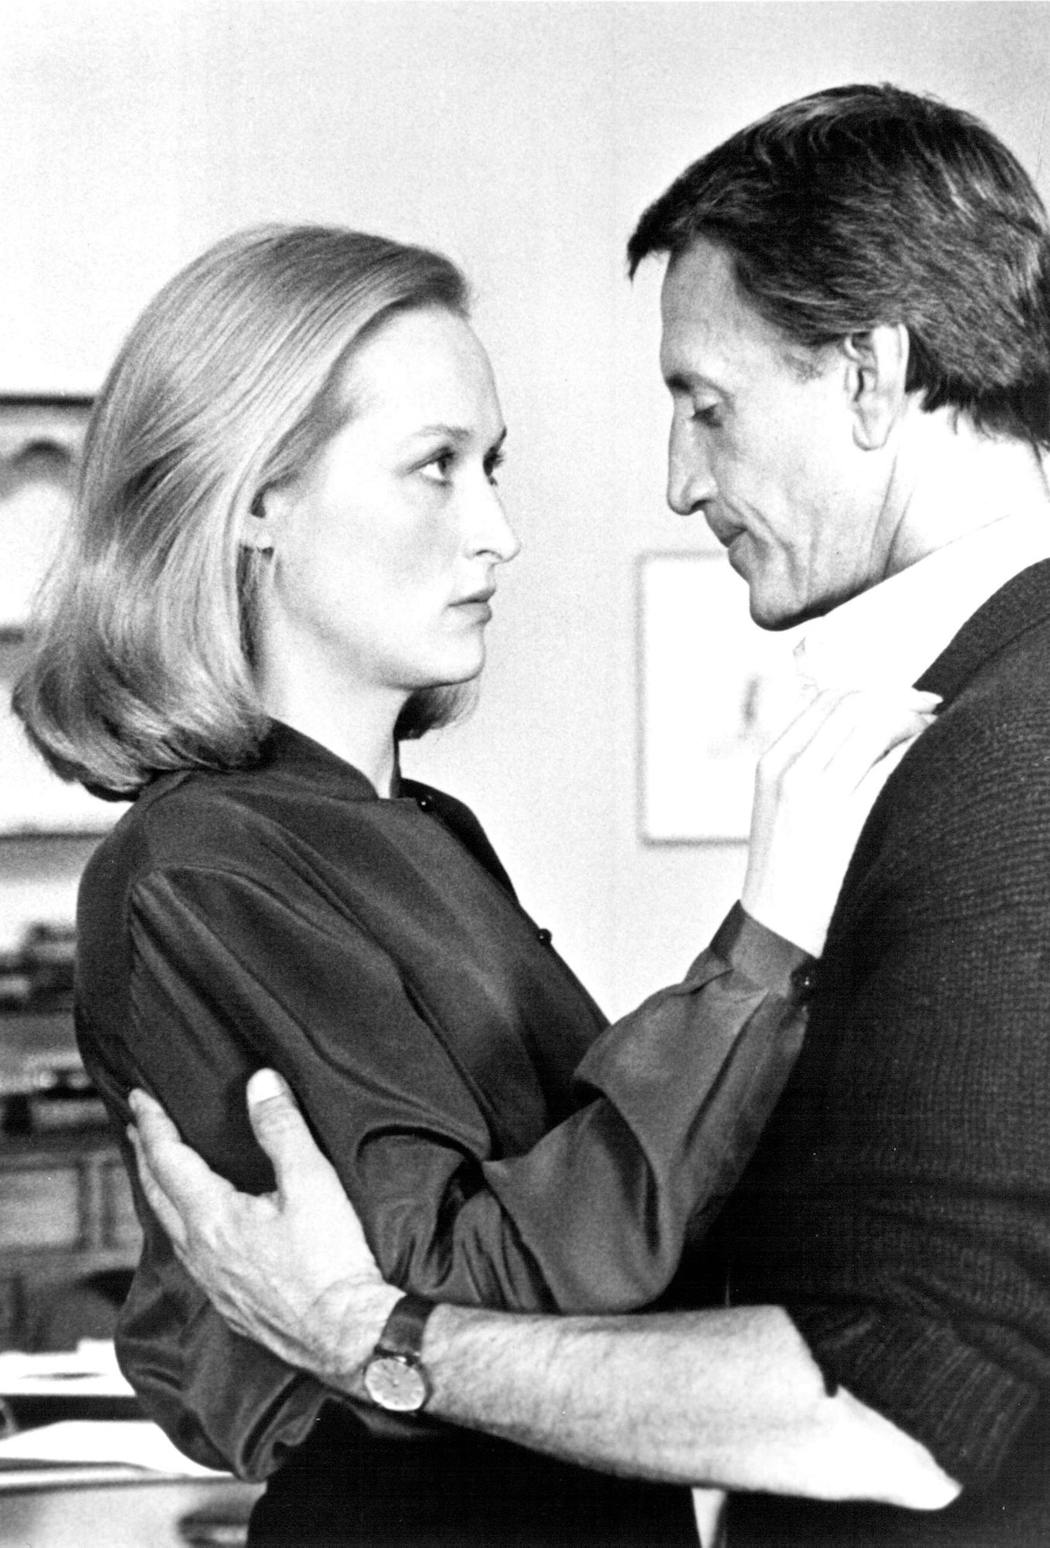 Meryl Streep’s character is suspected of murdering her lover in 1982’s “Still of the Night” (with Roy Scheider).